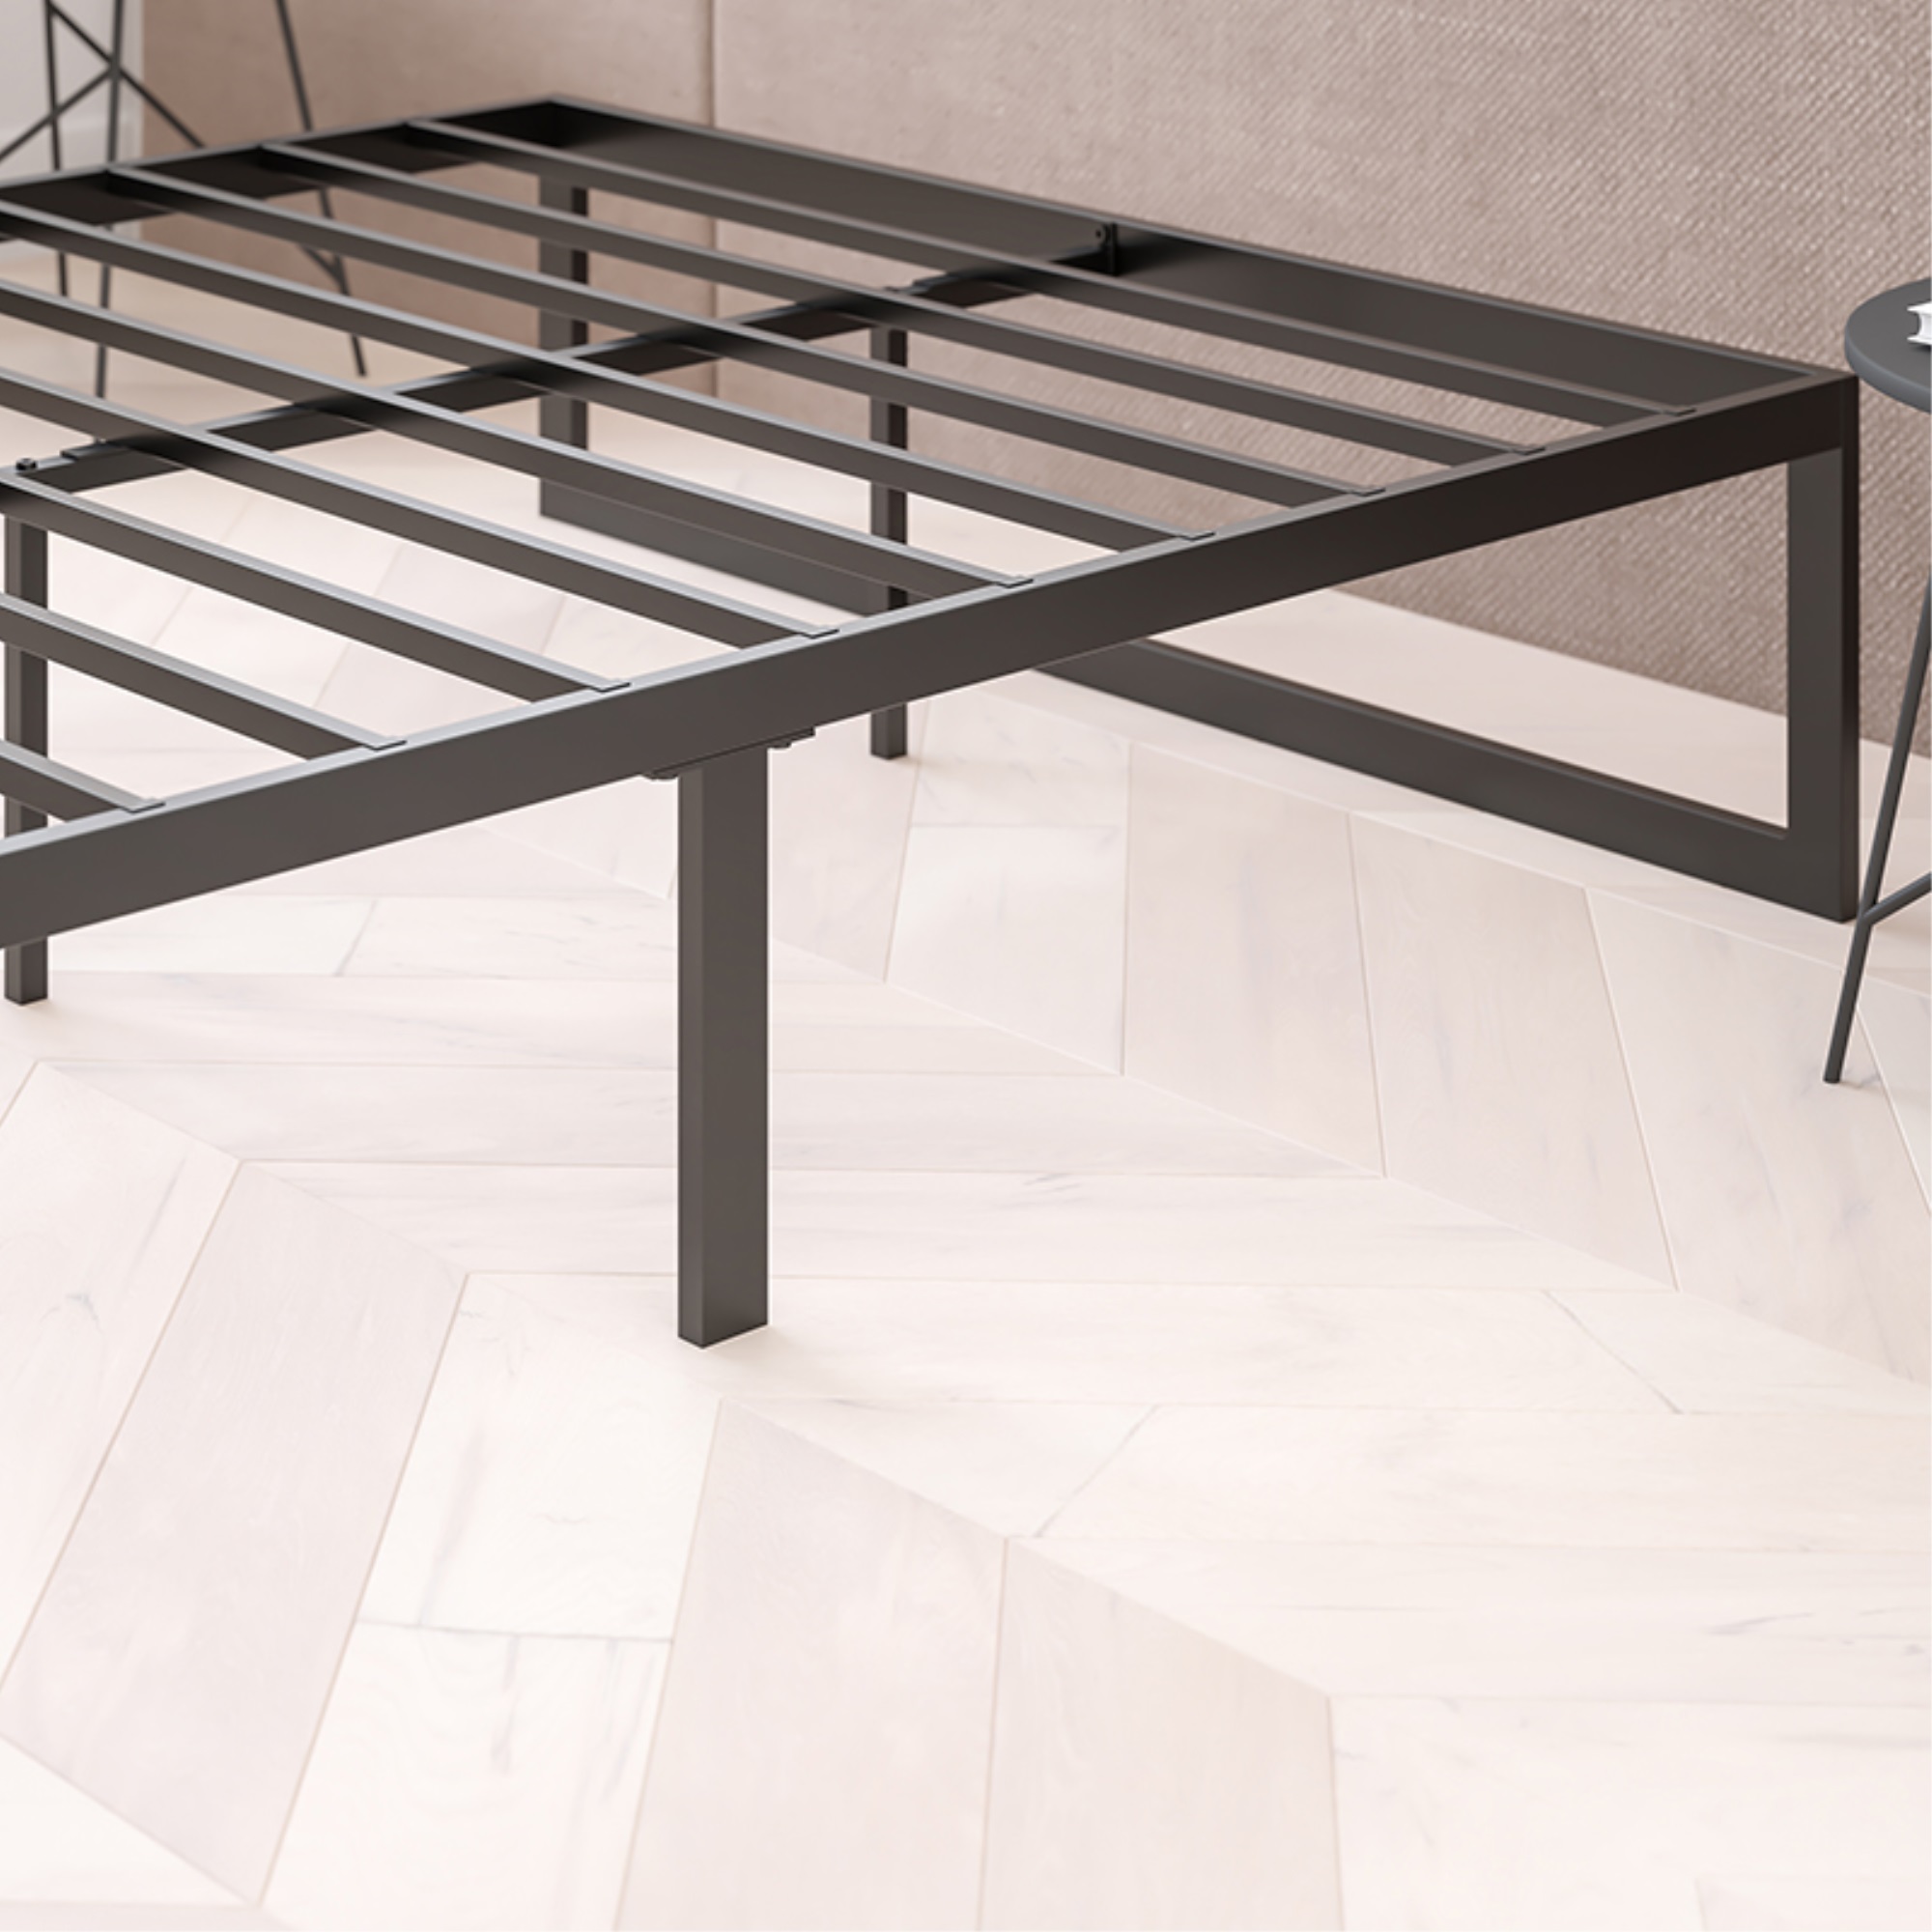 Flash Furniture 14 Inch Metal Platform Bed Frame - No Box Spring Needed with Steel Slat Support and Quick Lock Functionality (King)